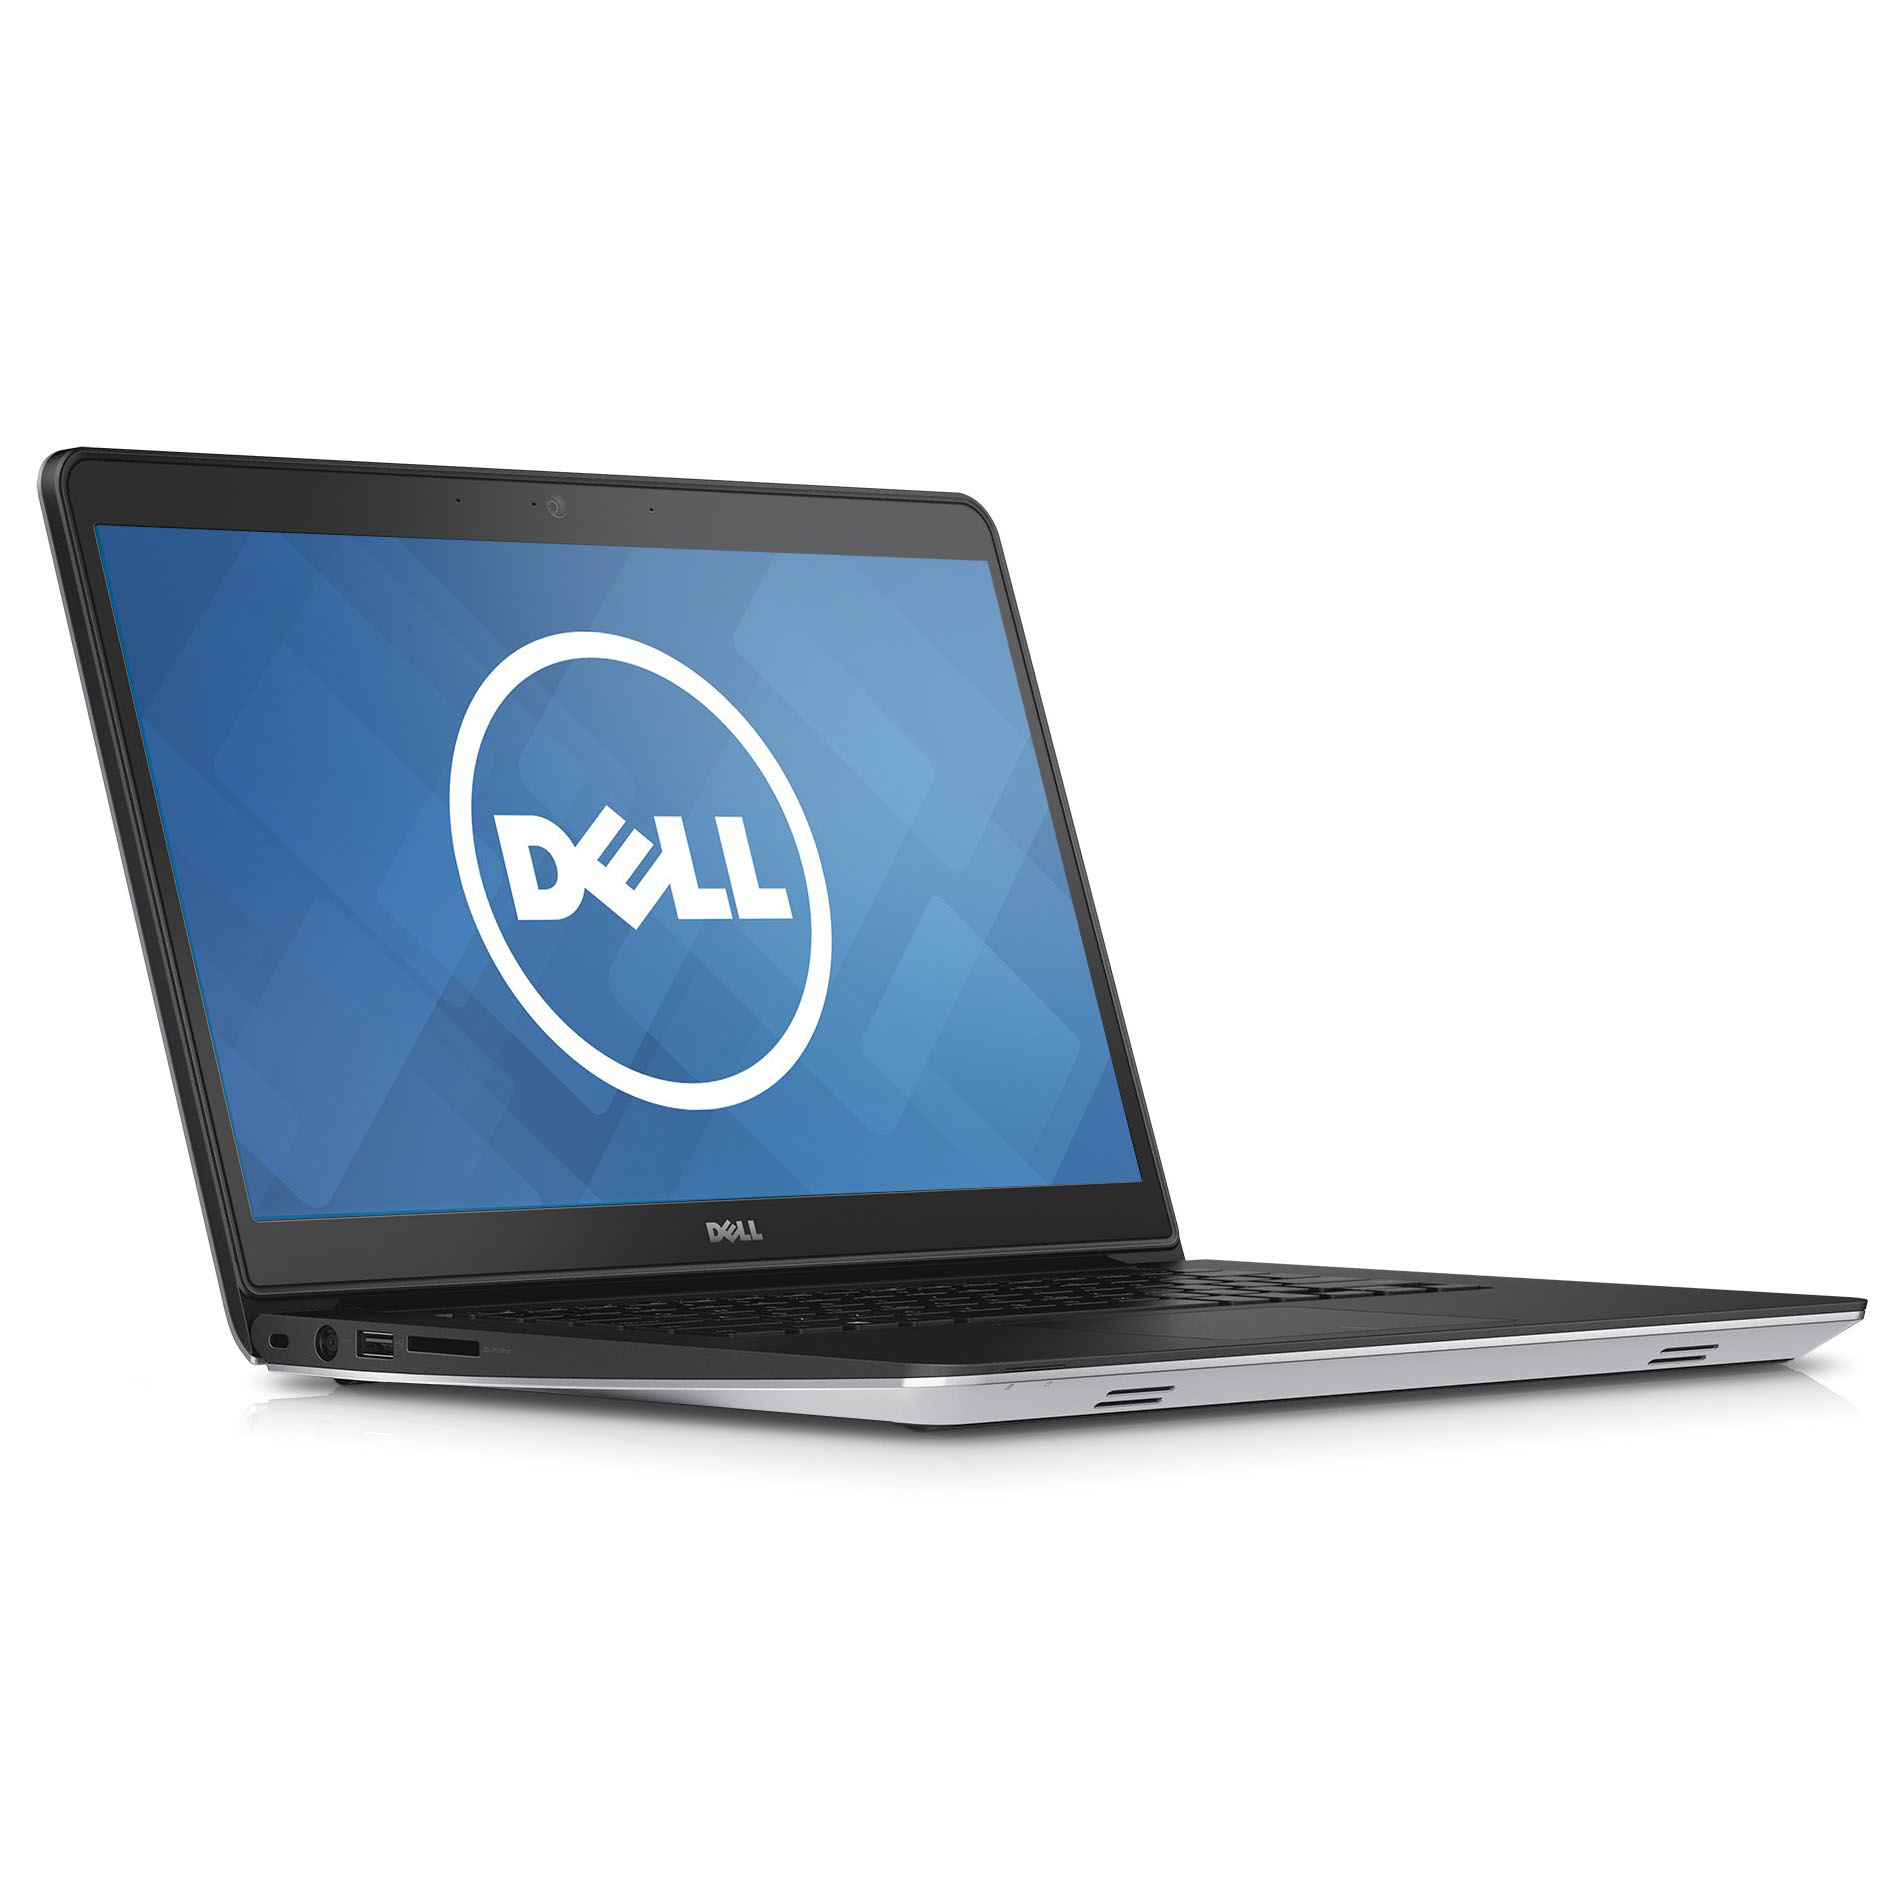 Dell Inspiron 14 5447 Notebook